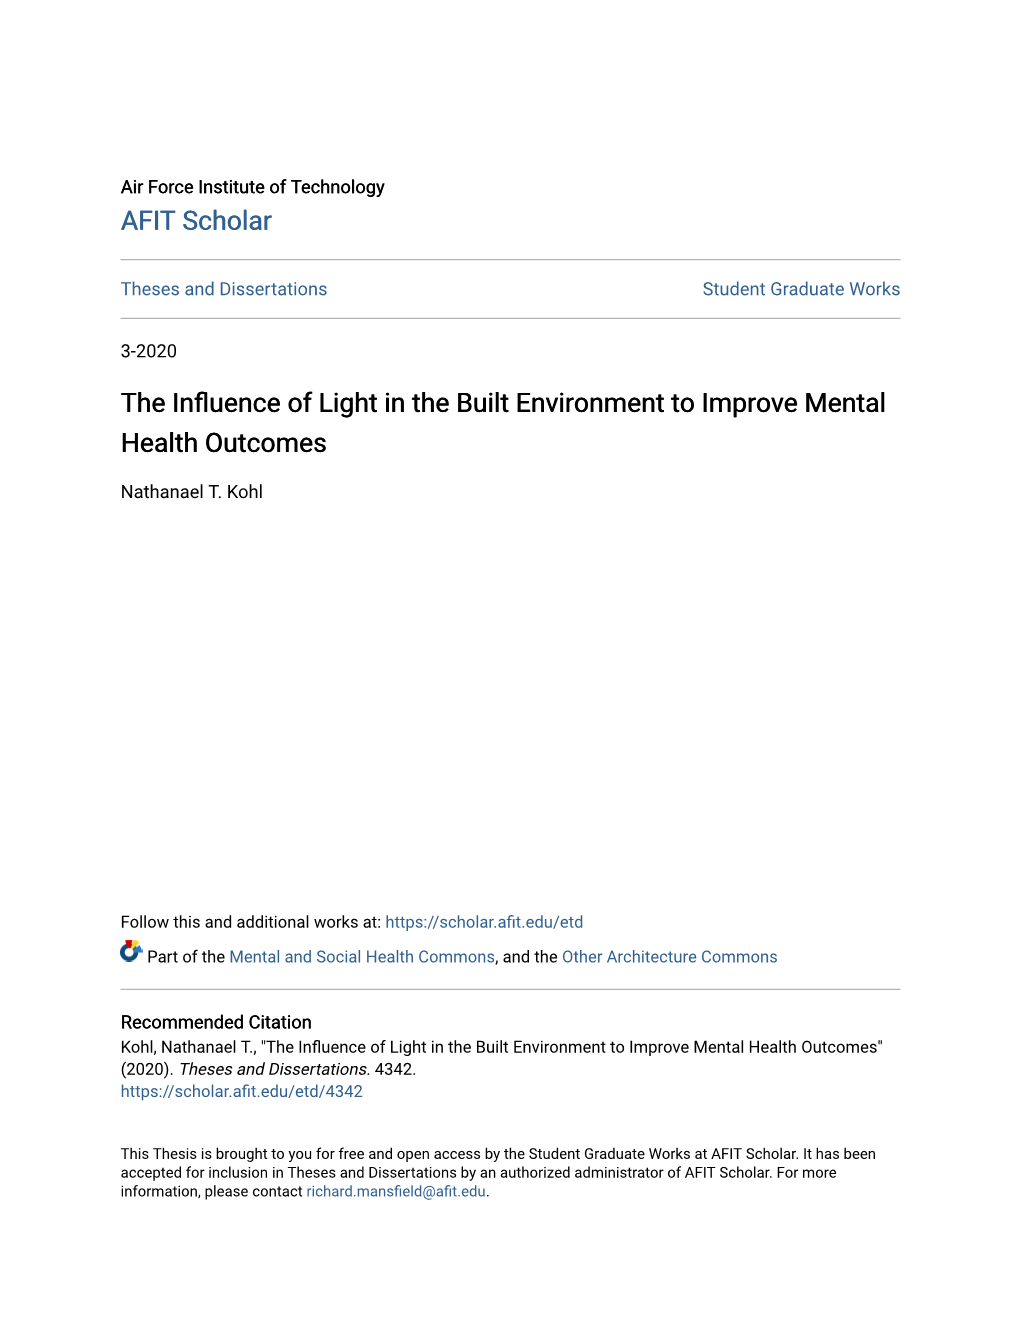 The Influence of Light in the Built Environment to Improve Mental Health Outcomes